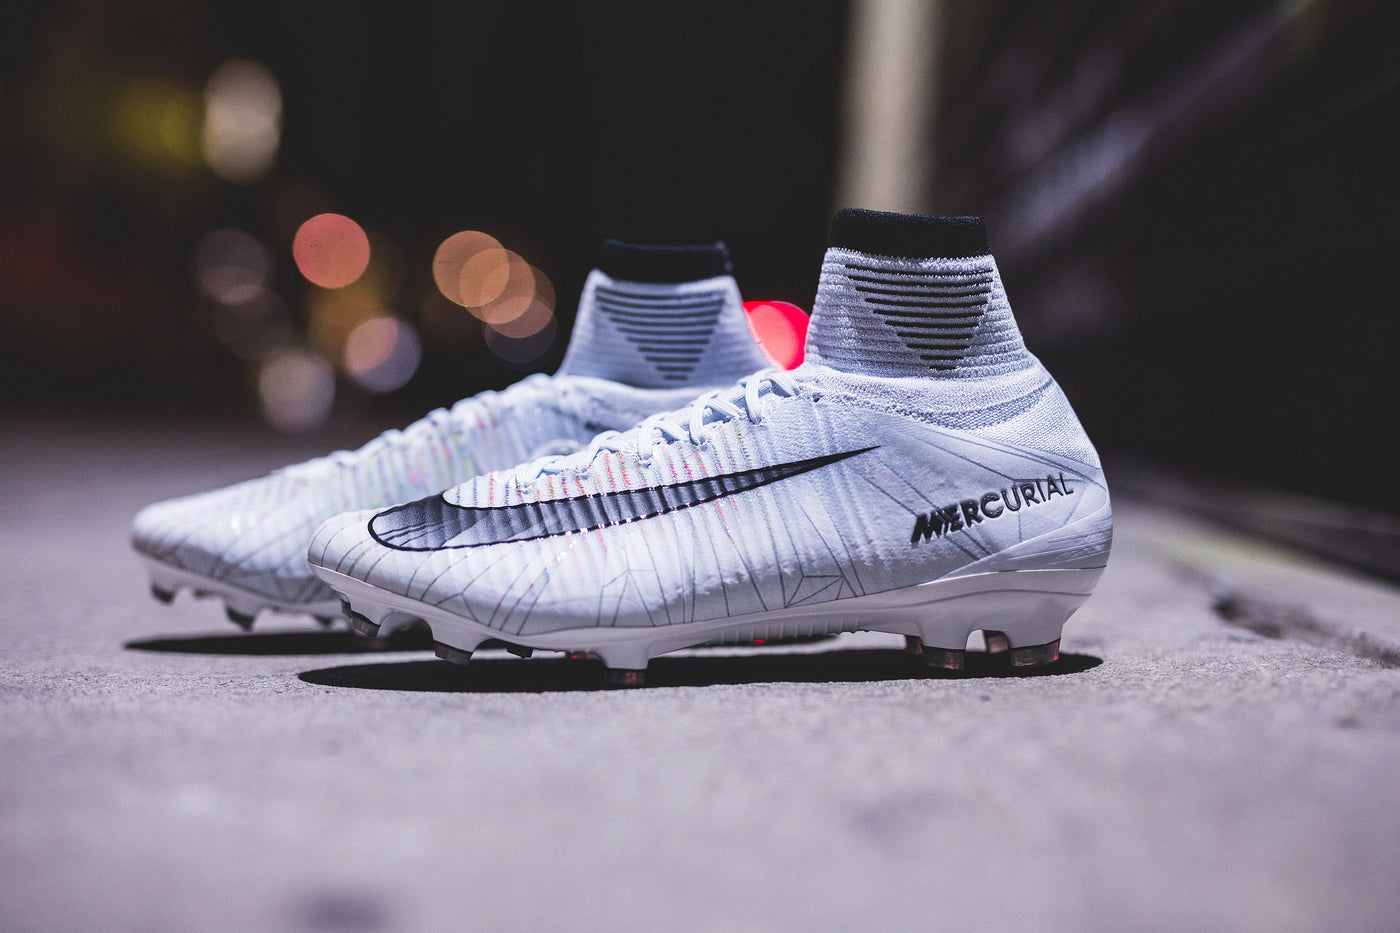 Nike Football - 'Chapter 5' CR7 - Mercurial Superfly and Vapor